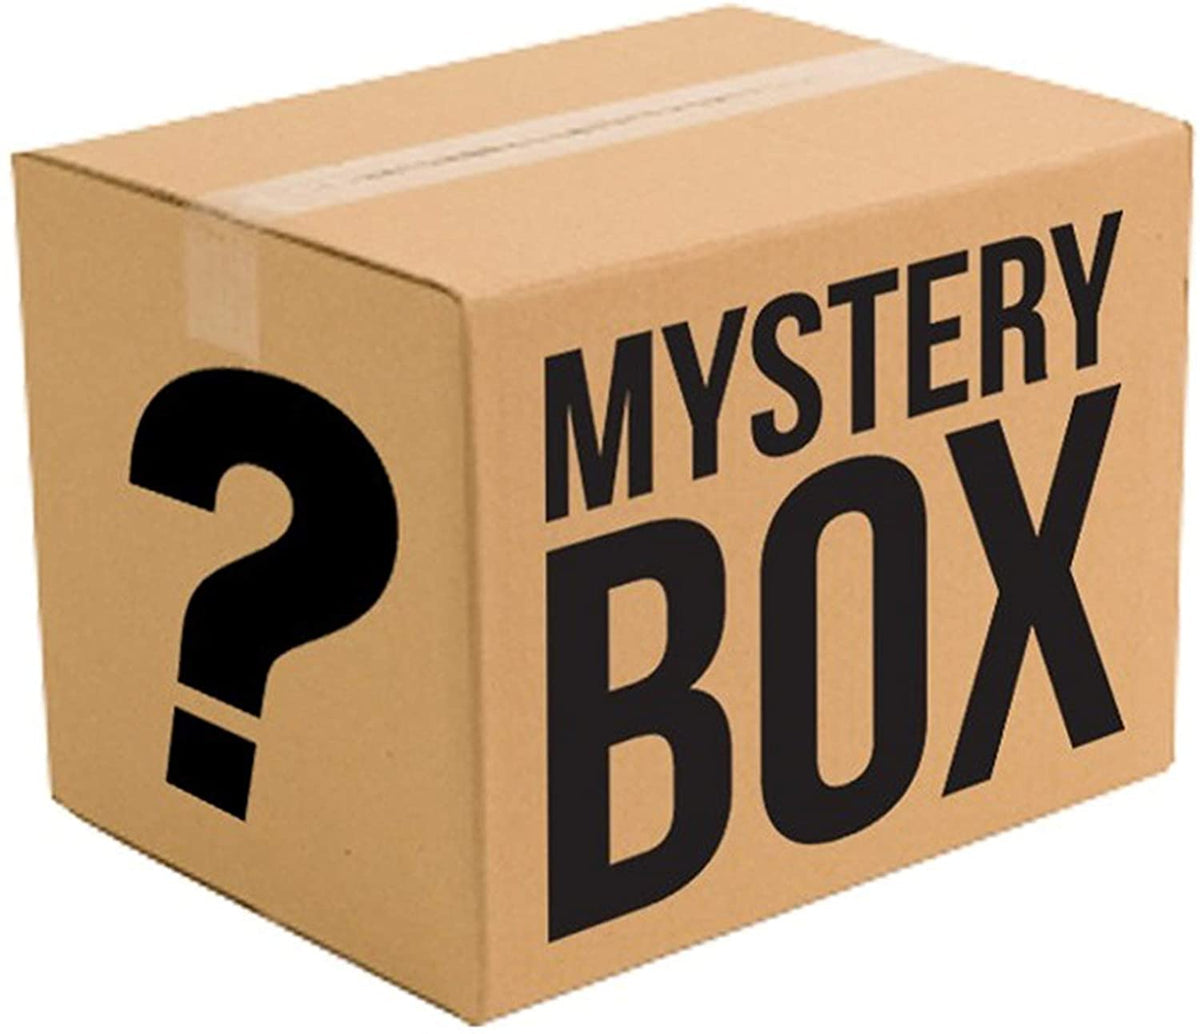 Dry Drinker's Low Alcohol Mystery Box - 12 x Mixed Case plus a Free Glass